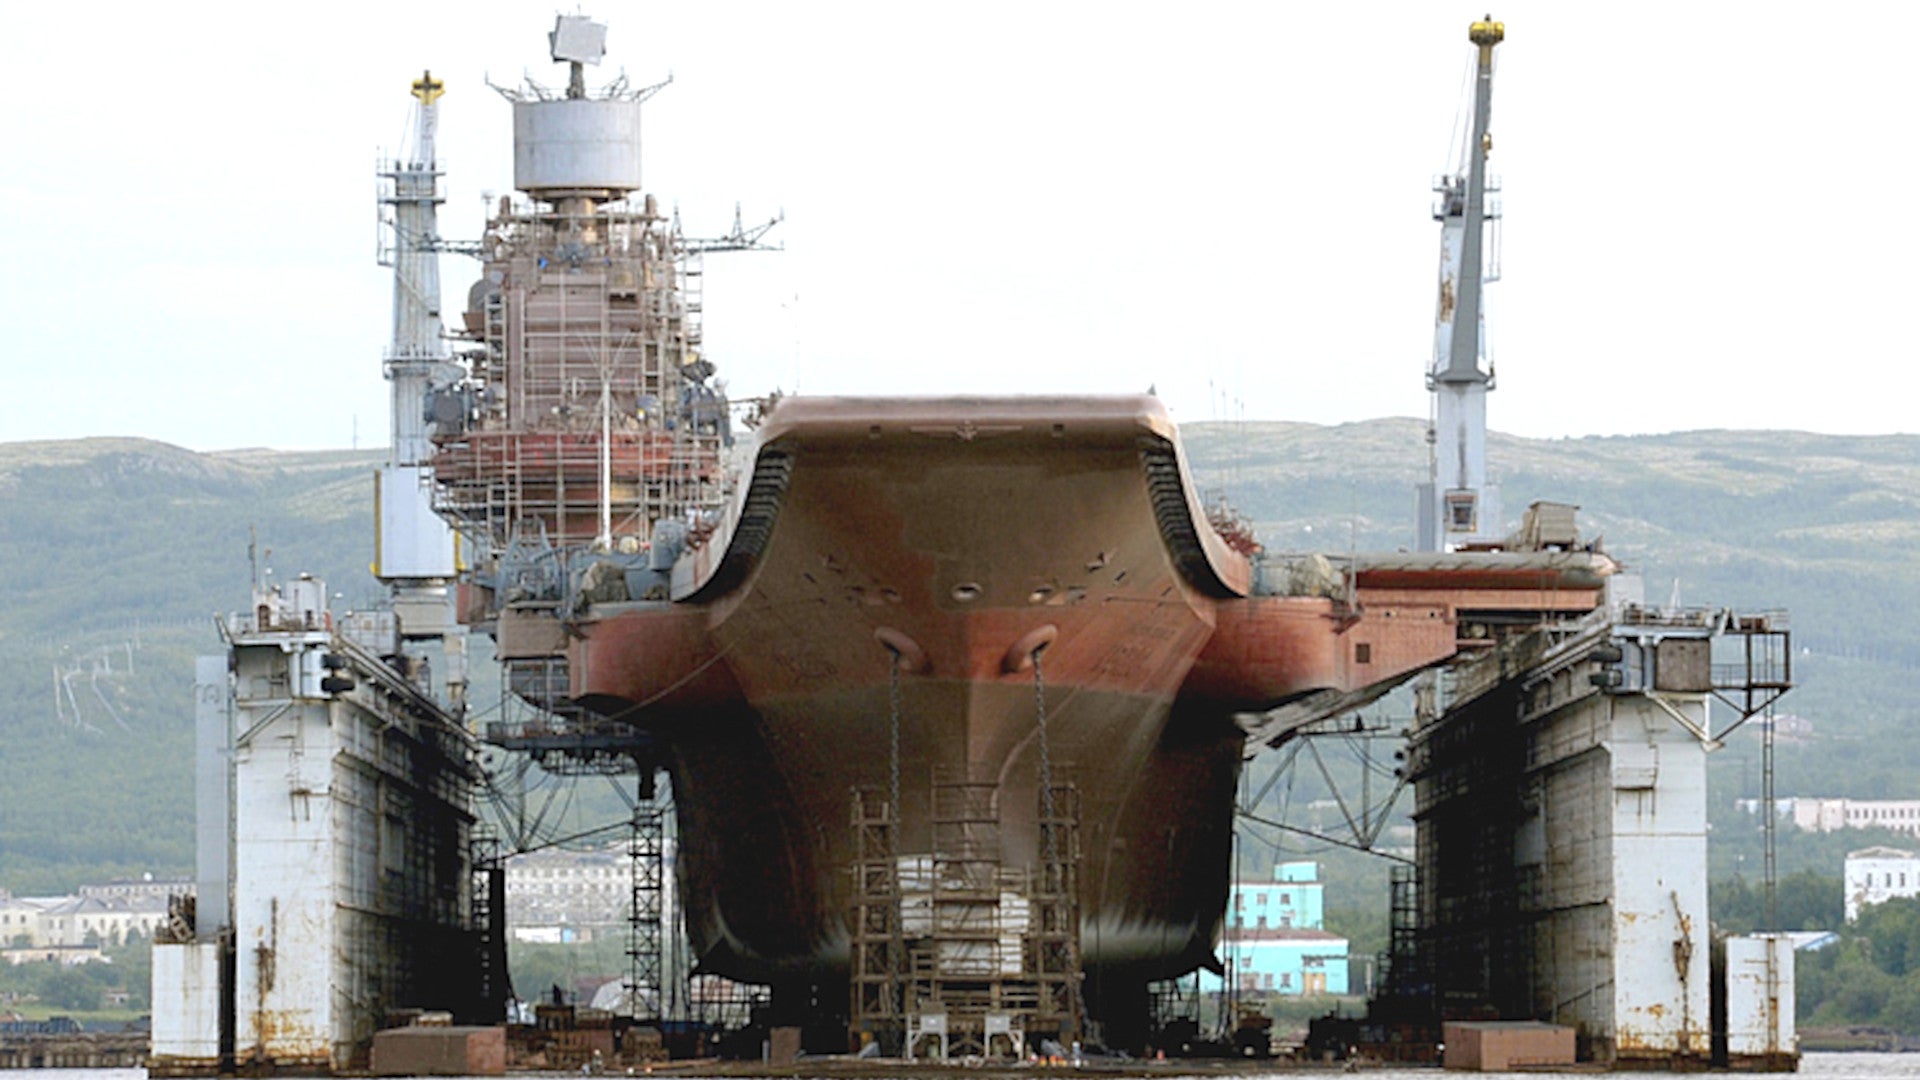 Russia Admits It Doesn’t Have Any Dry Docks That Can Fit Its Lone Carrier After Accident